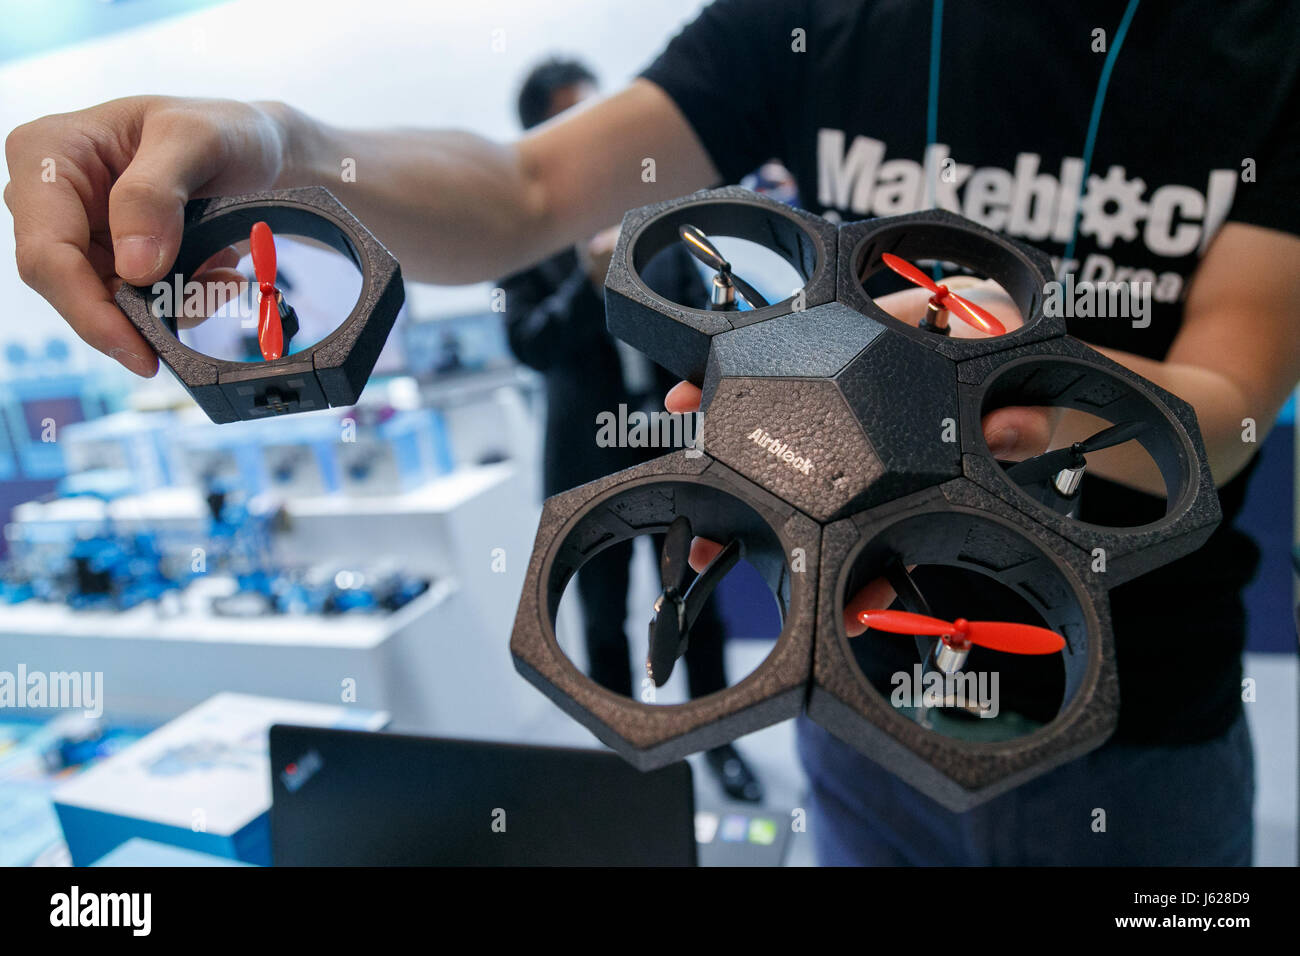 An exhibitor shows a drone Airblock during the Educational IT Solutions  Expo (EDIX) at Tokyo Big Sight on May 19, 2017, Tokyo, Japan. EDIX is  Japan's largest Educational IT trade show attracting